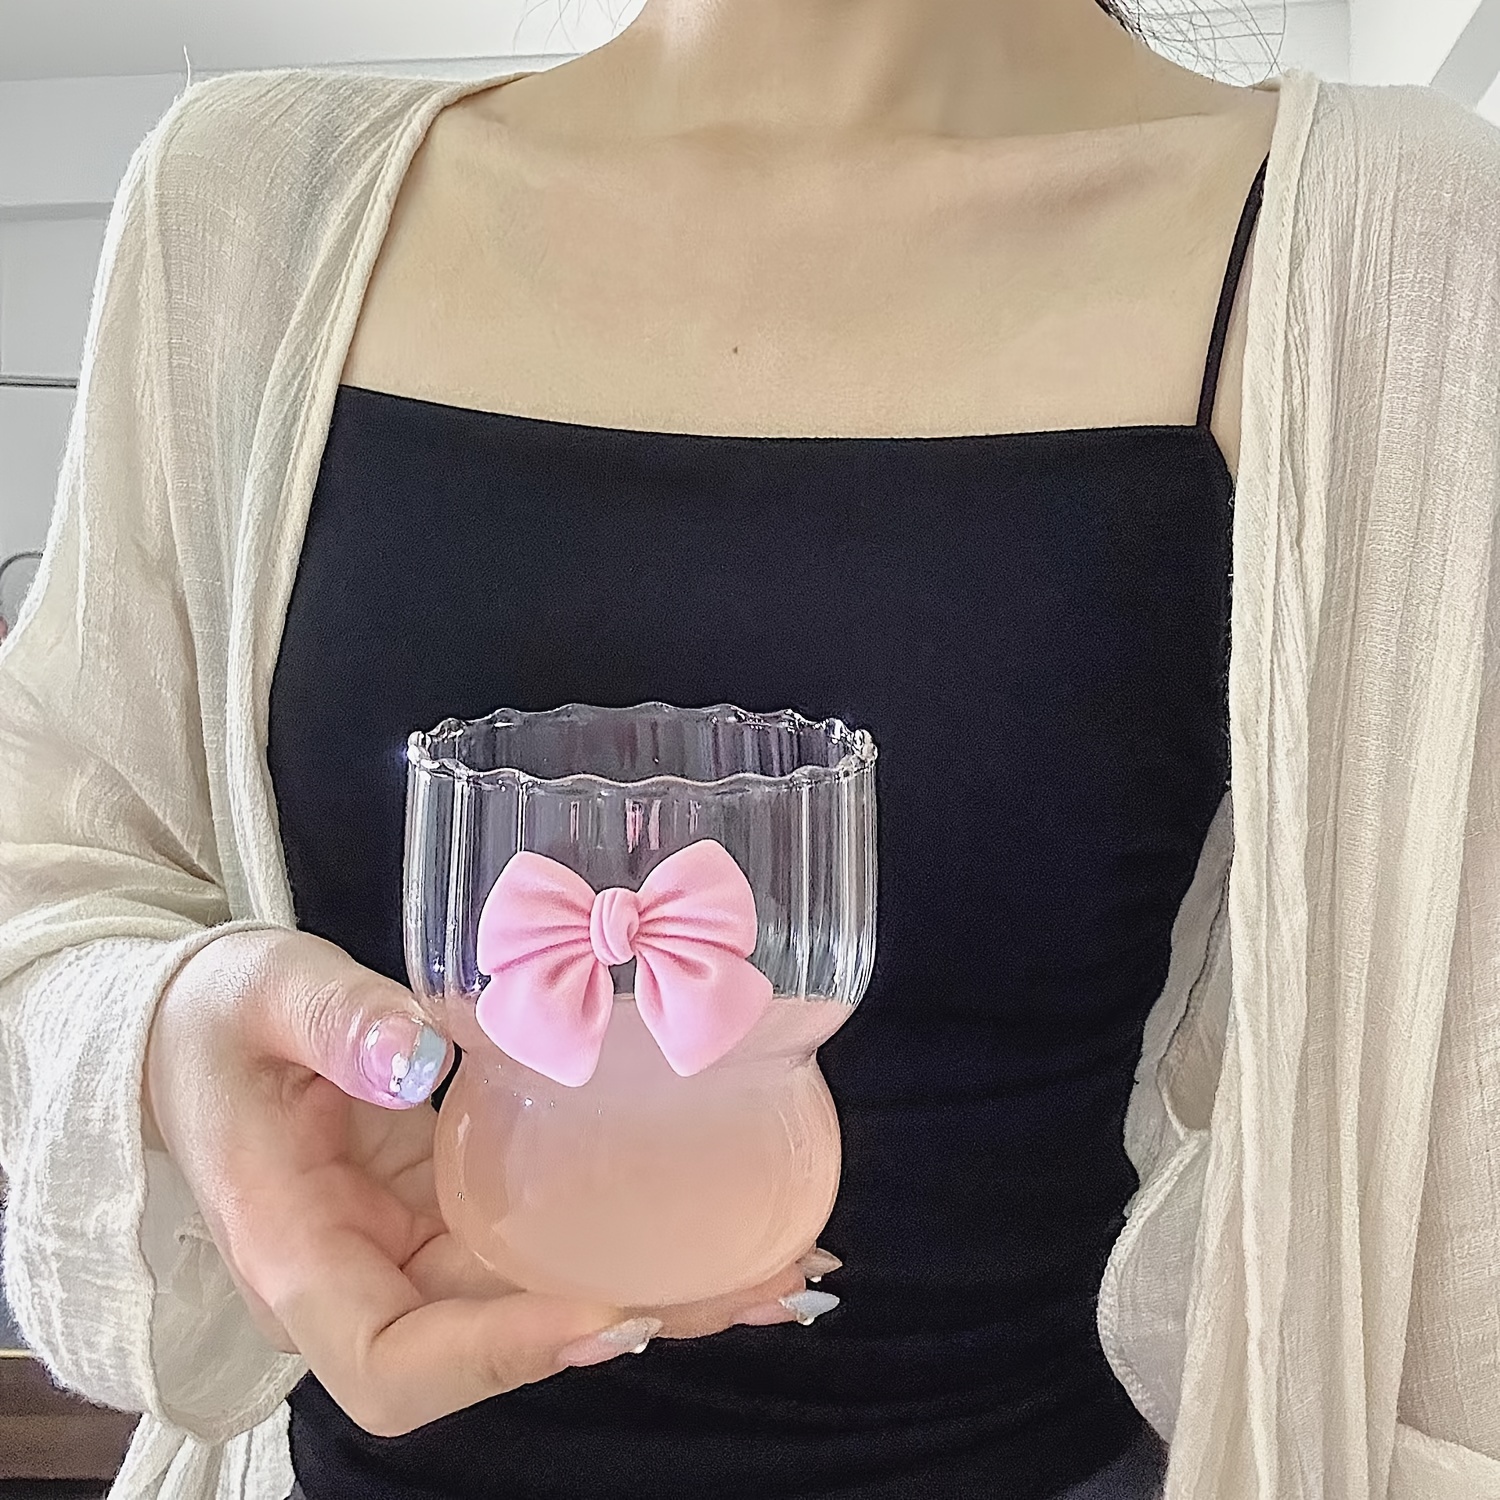 

1pc, Bow Decor Glass Cup, Cute Girly Water Cup, Iced Coffee Cups, Drinking Glasses For Juice, Milk, Tea, And More, Summer Winter Drinkware